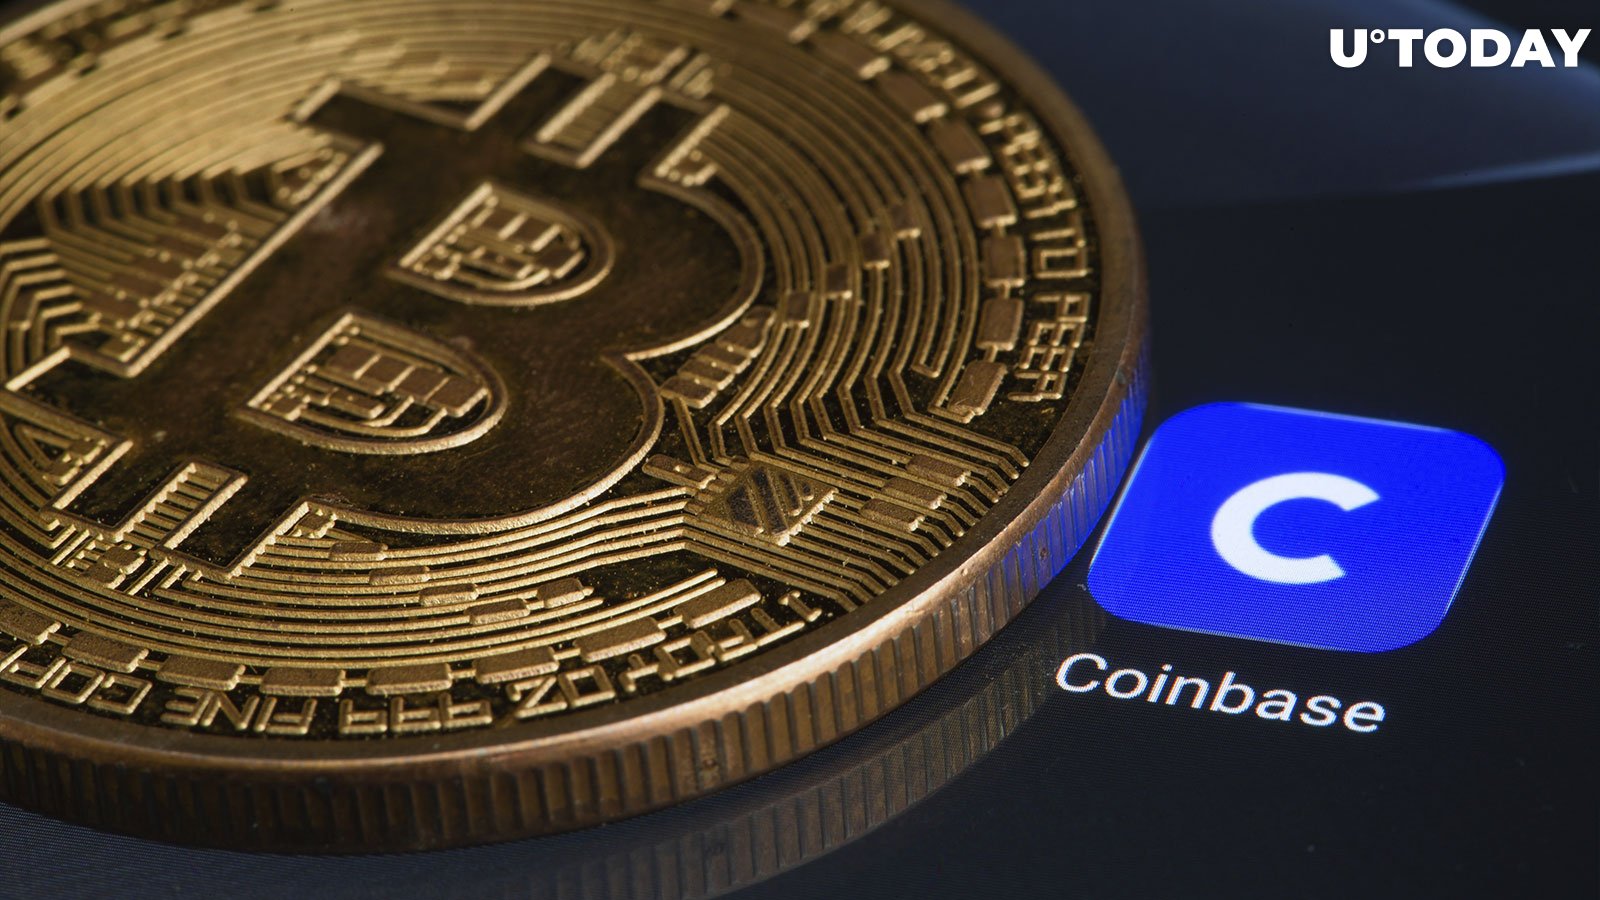 What Do Coinbase Transfers Mean for Bitcoin (BTC) Price? Here's What This Analyst Has to Say